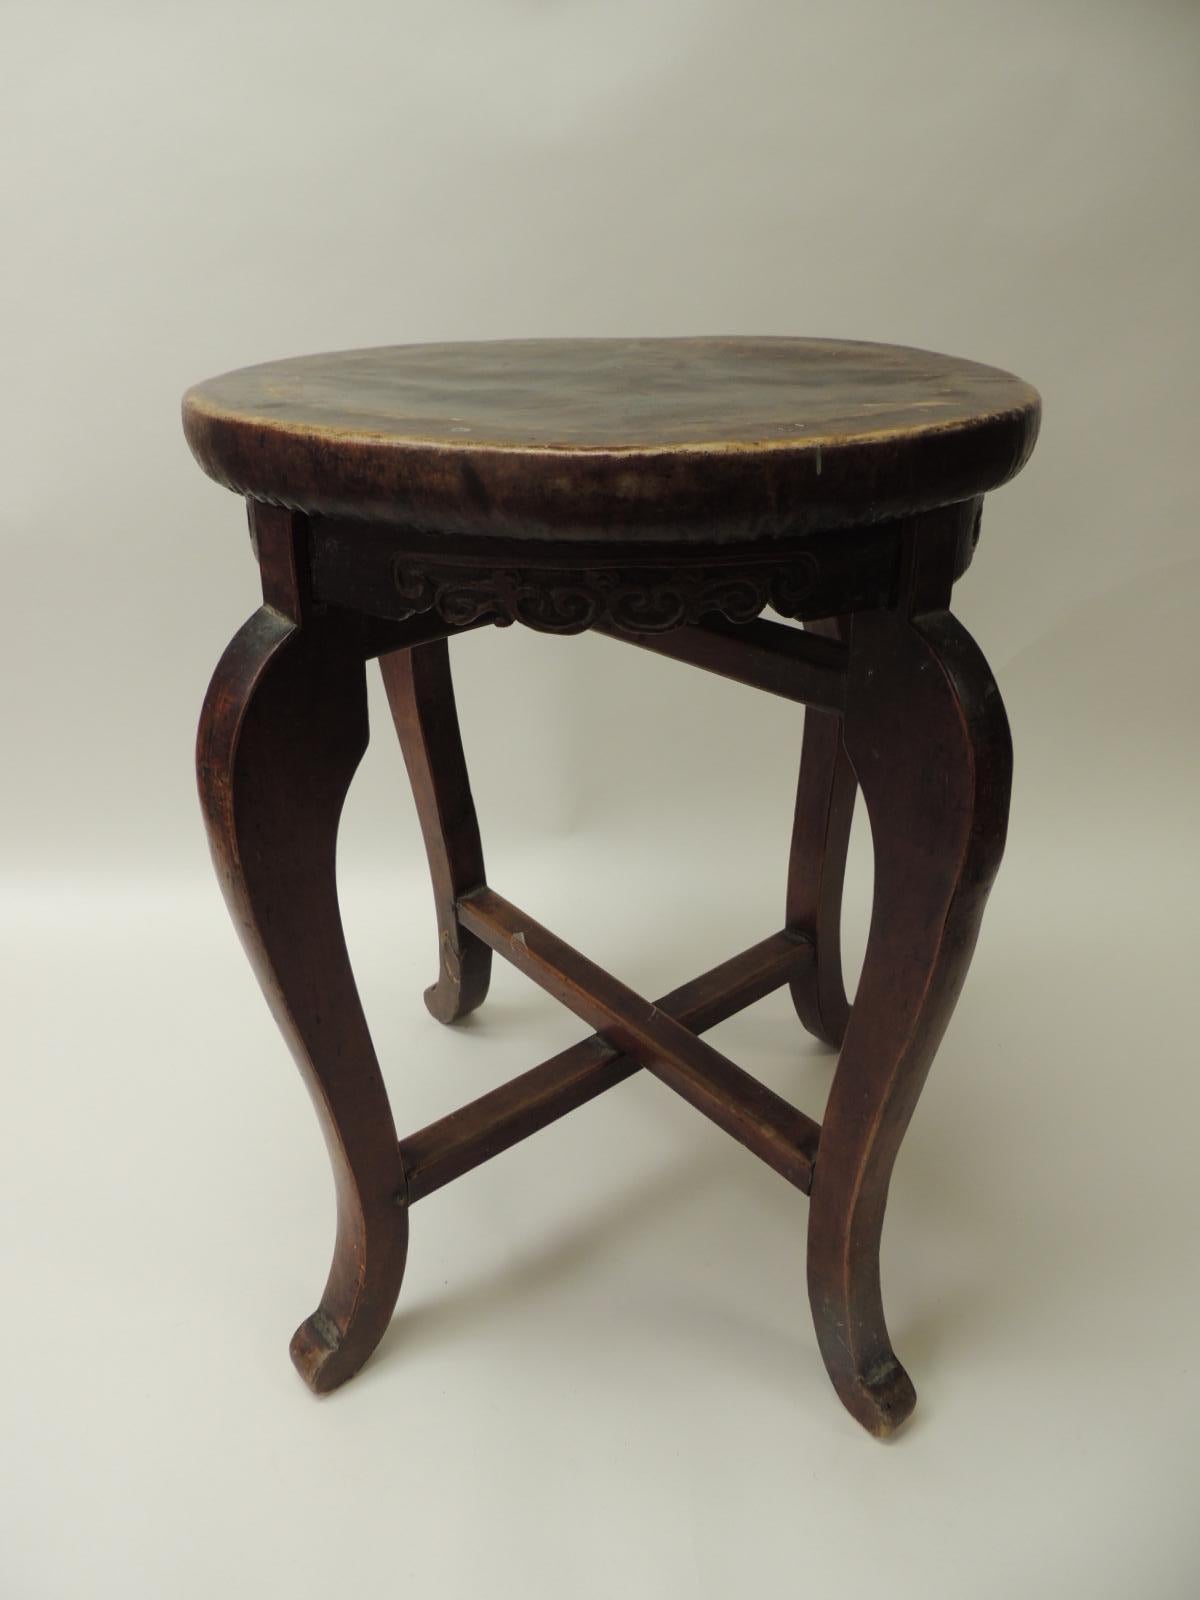 Round Asian side table or stool with carved apron and turned wood legs.
Pig skin covered round side table or sturdy enough to use as a stool.
X base crossed legs.
Size: 15